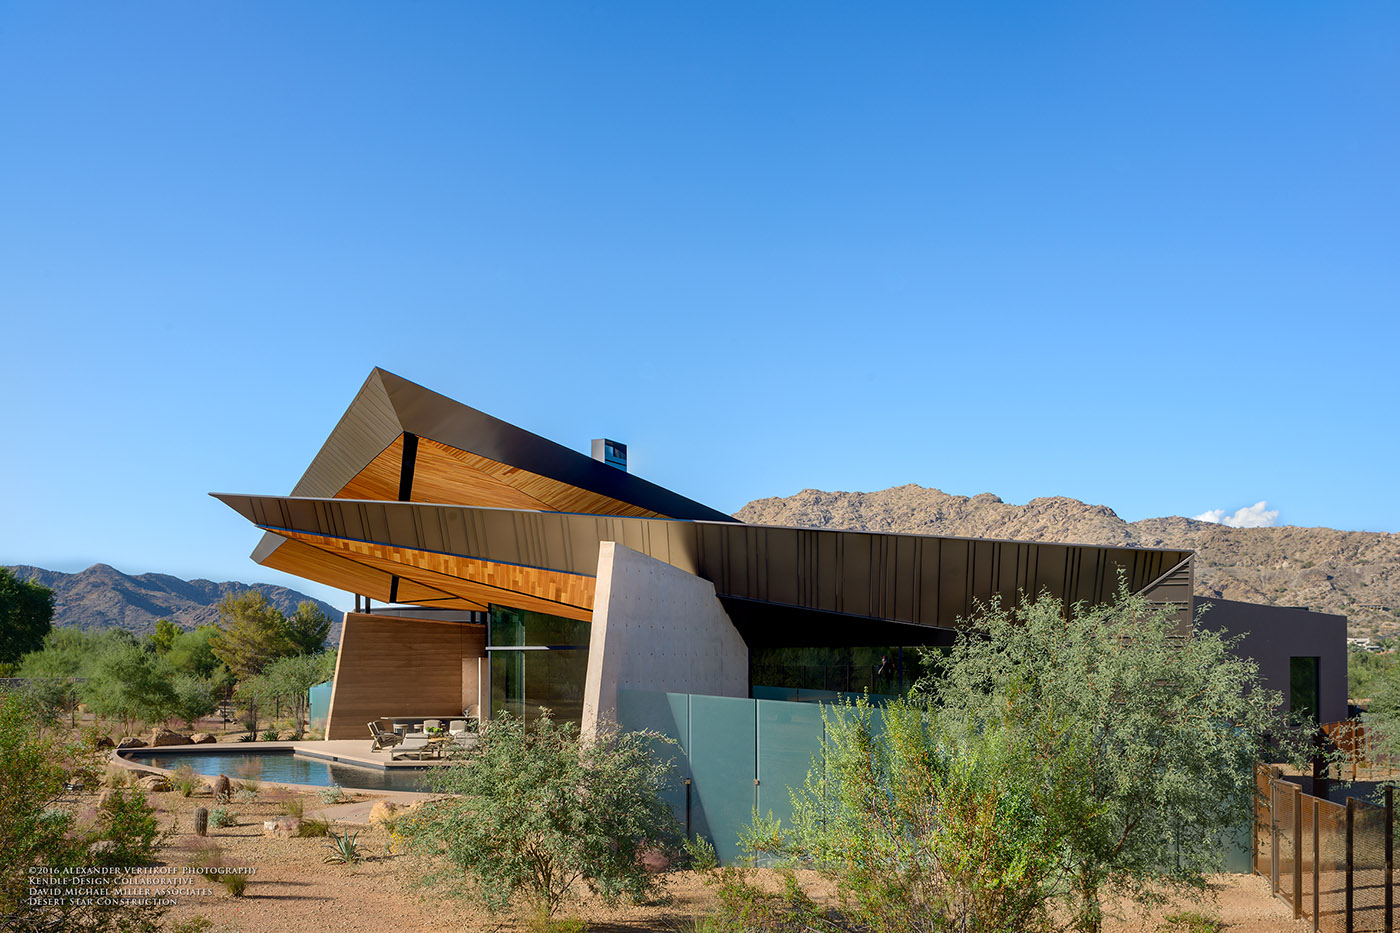 Playful collection of organic shapes in the desert: Dancing Light Residence